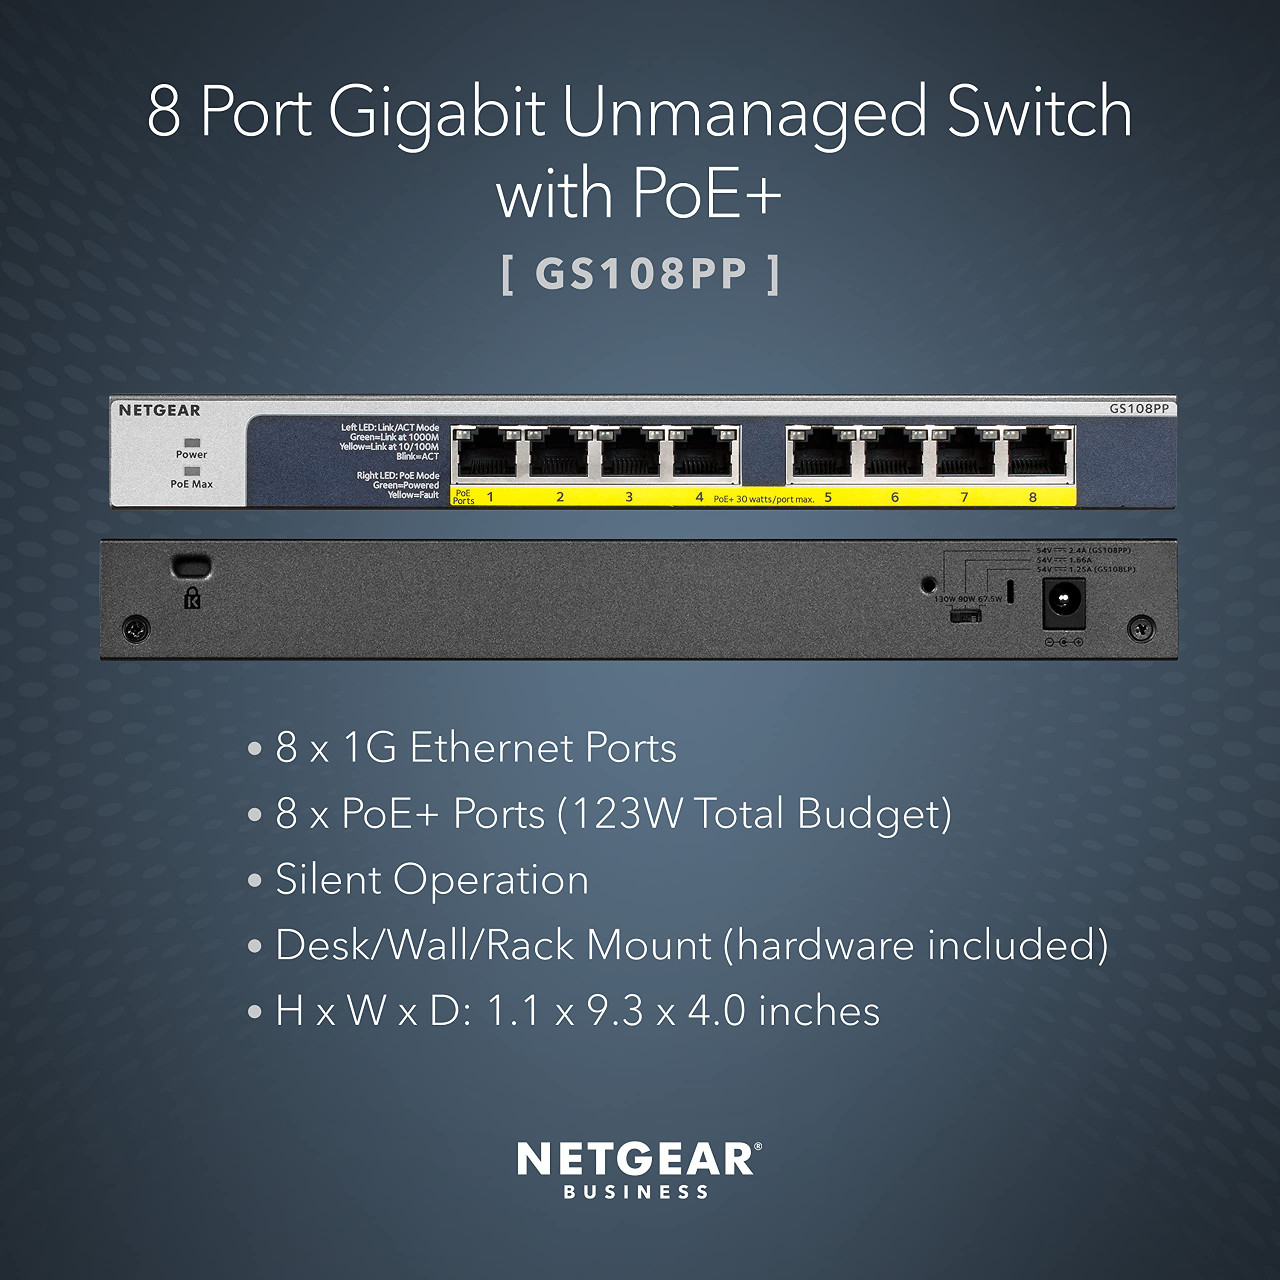 NETGEAR 8-Port Gigabit Ethernet Unmanaged PoE Switch (GS108PP) - with 8 x PoE+ @ 123W Upgradeable, Desktop, Wall Mount or Rackmount, and Limited Lifetime Protection